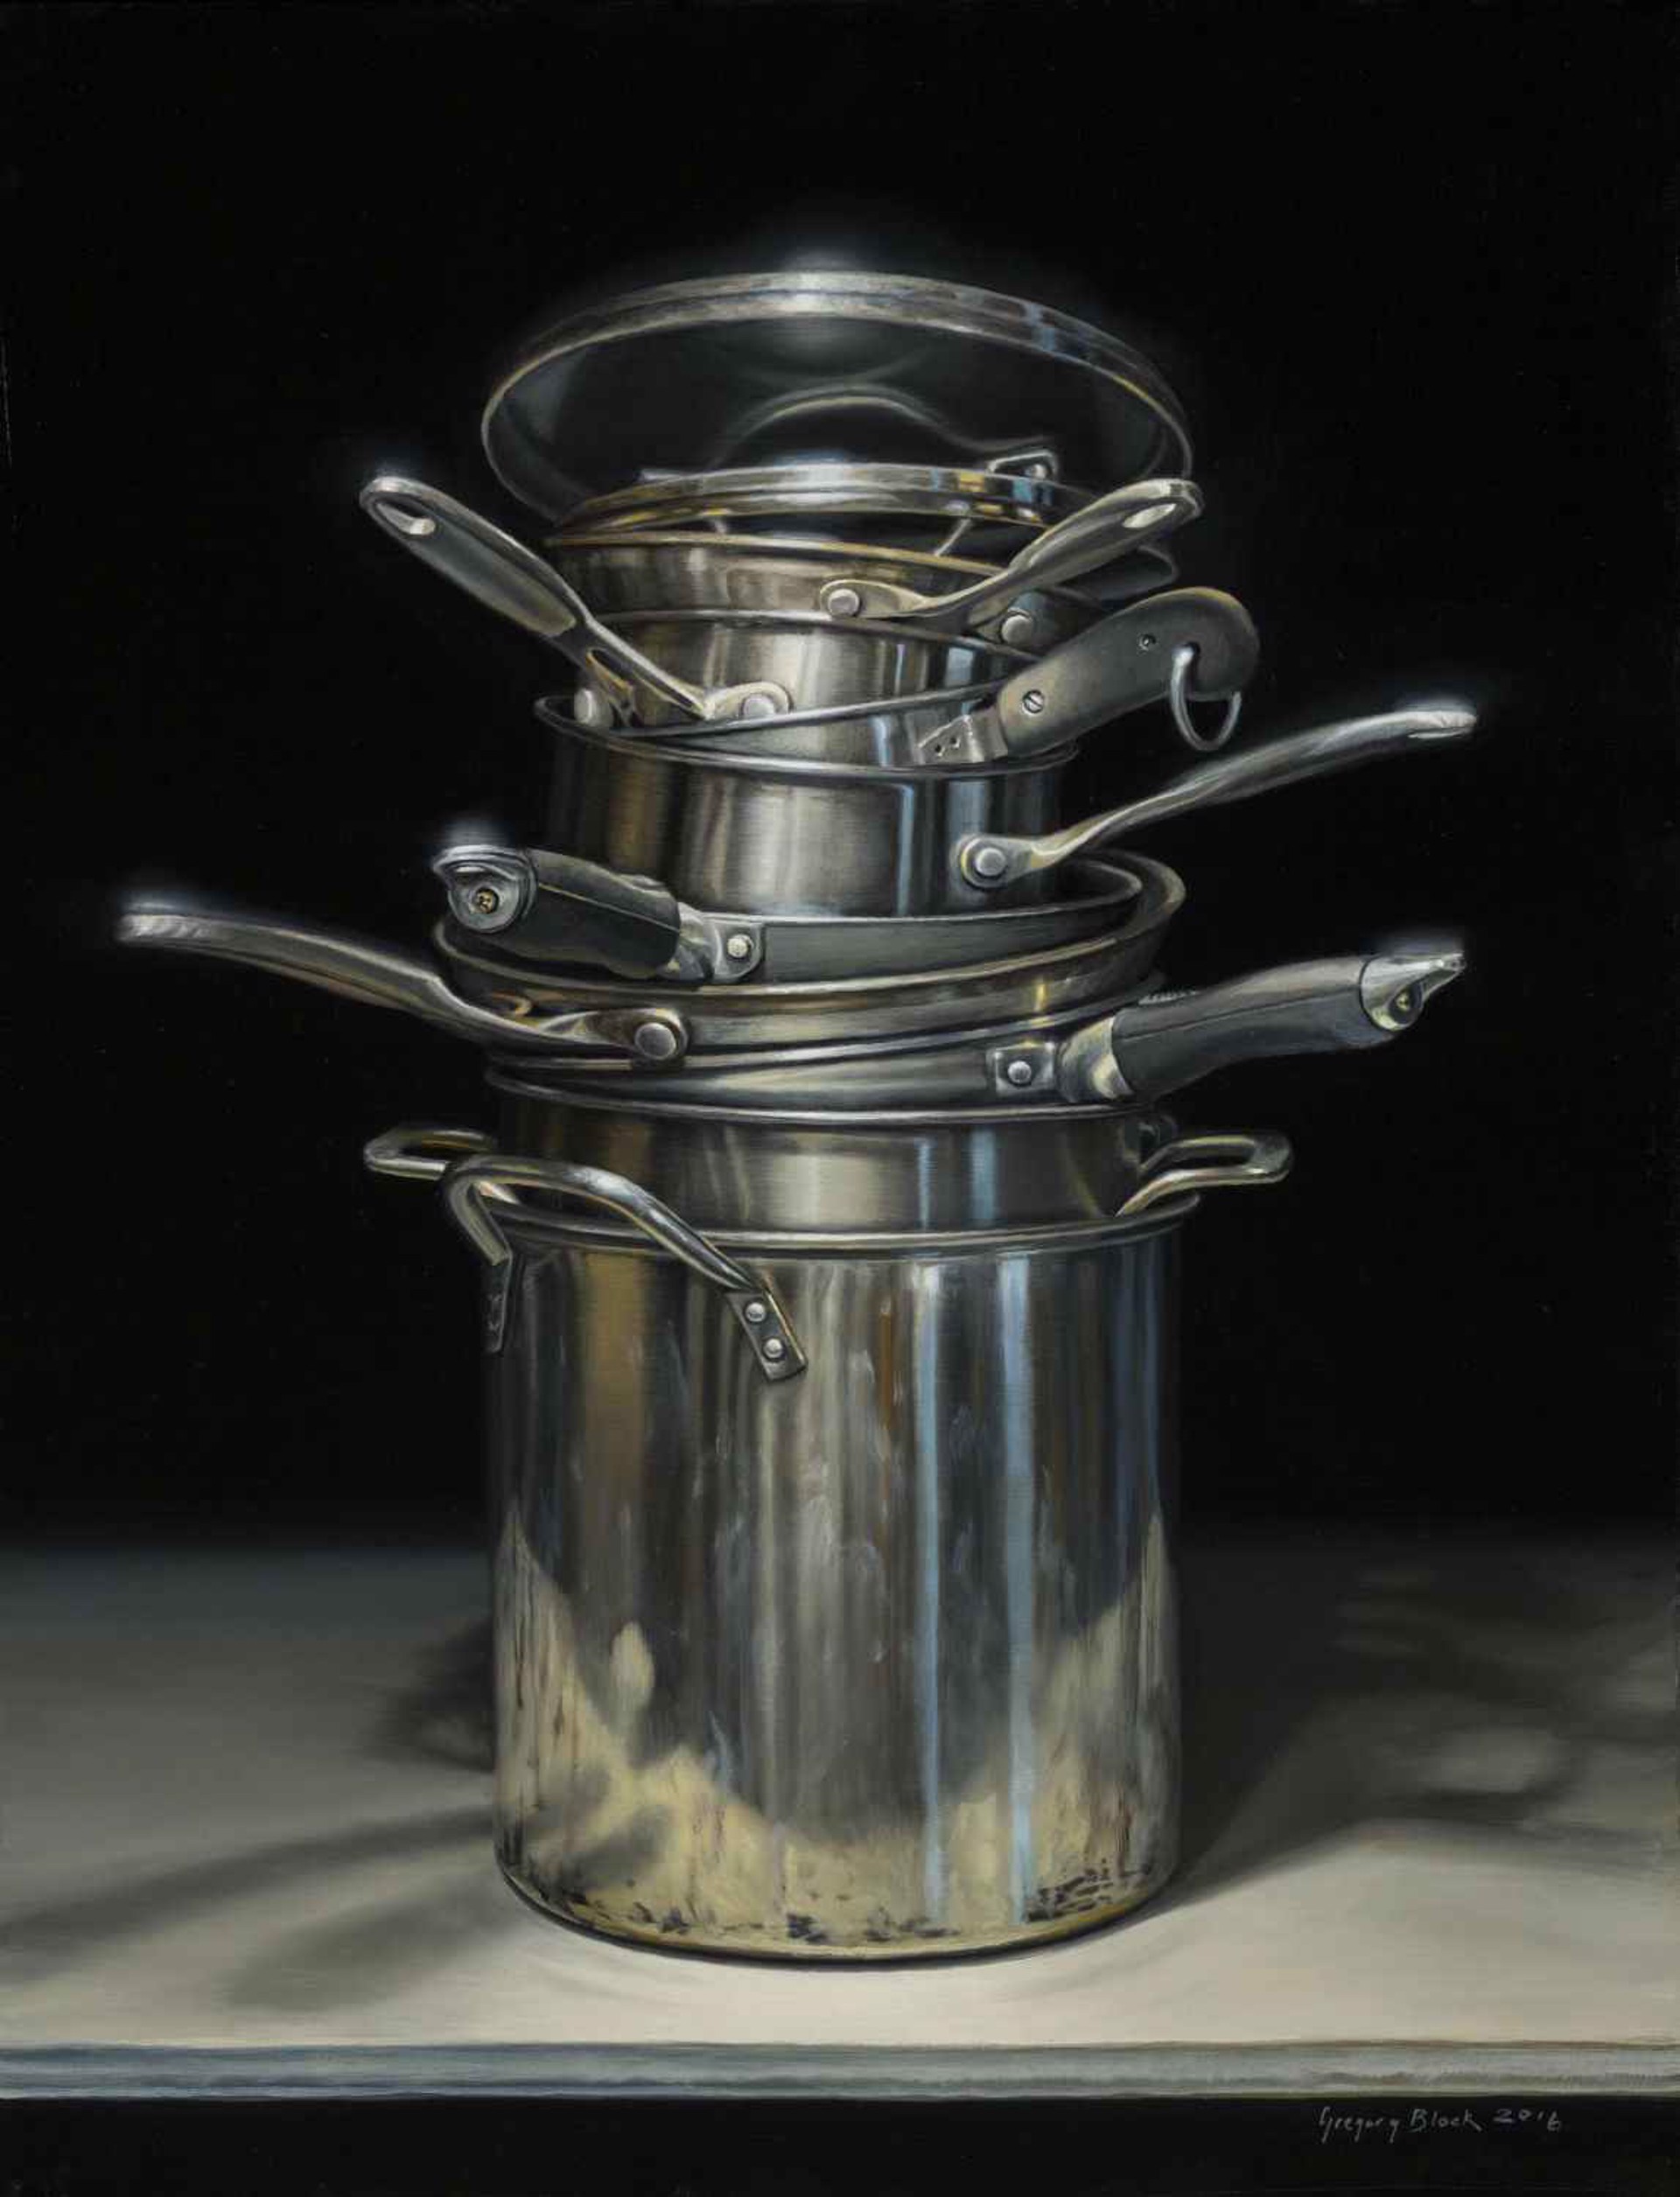 Pots and Pans by Gregory Block